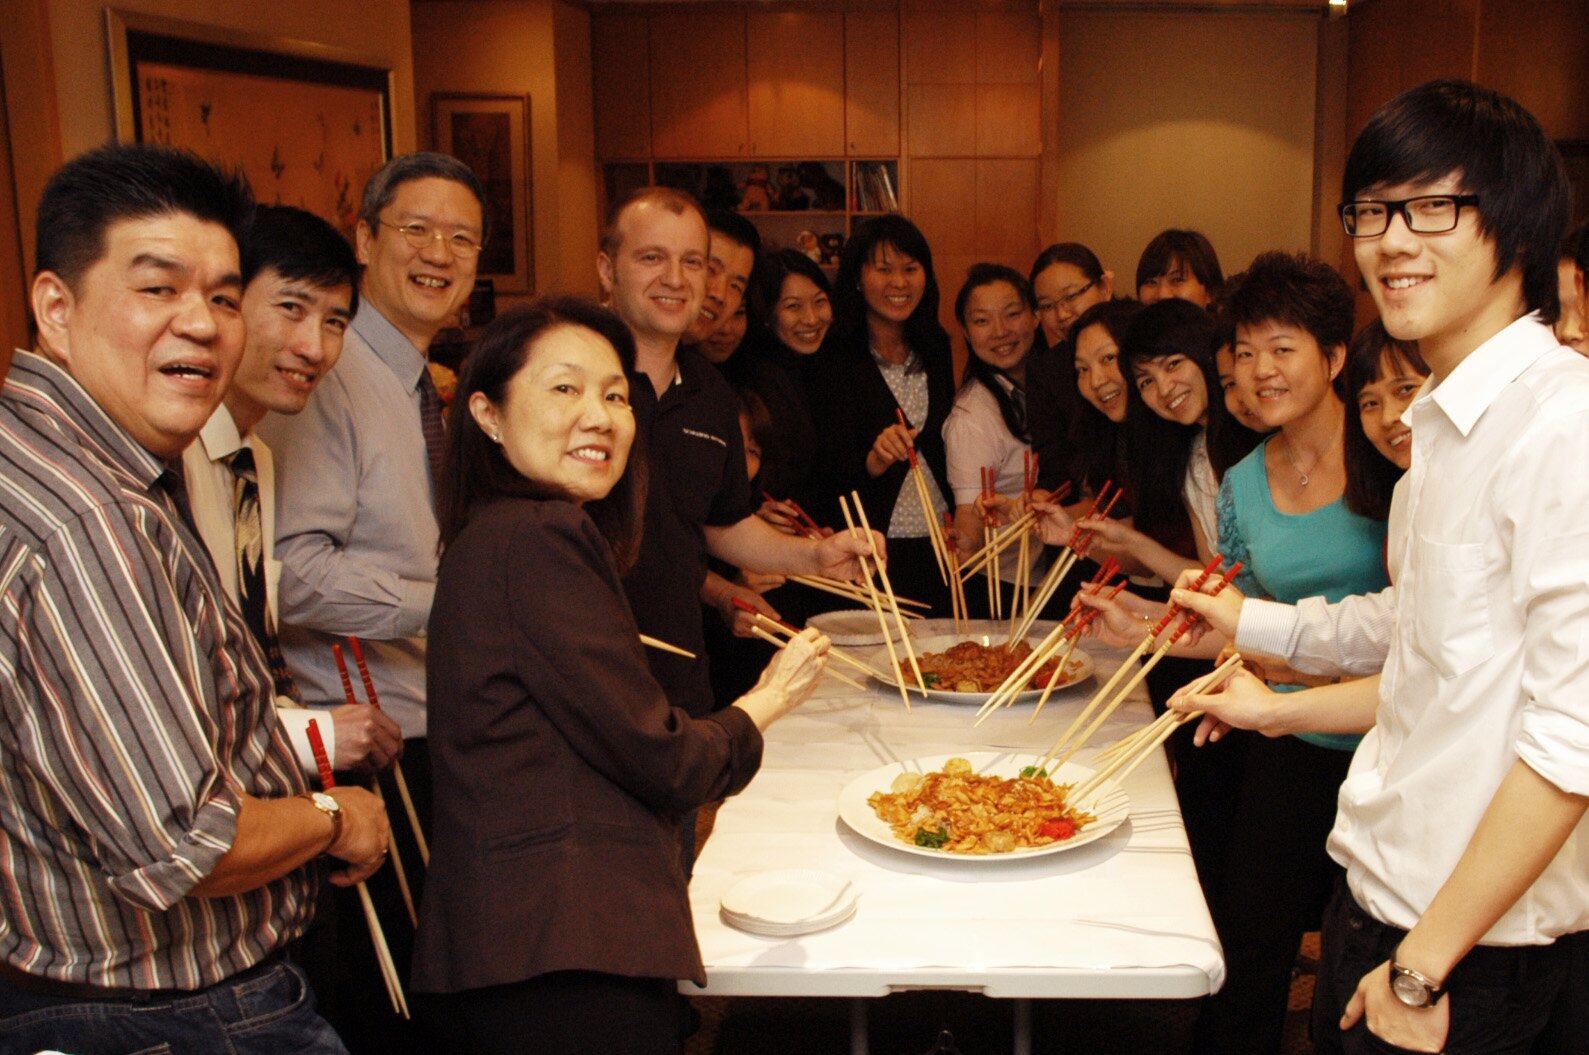 Dr. Jerry Tan, his team and SCHWIND service technician Alex Schroeck celebrate the Chinese New Year together